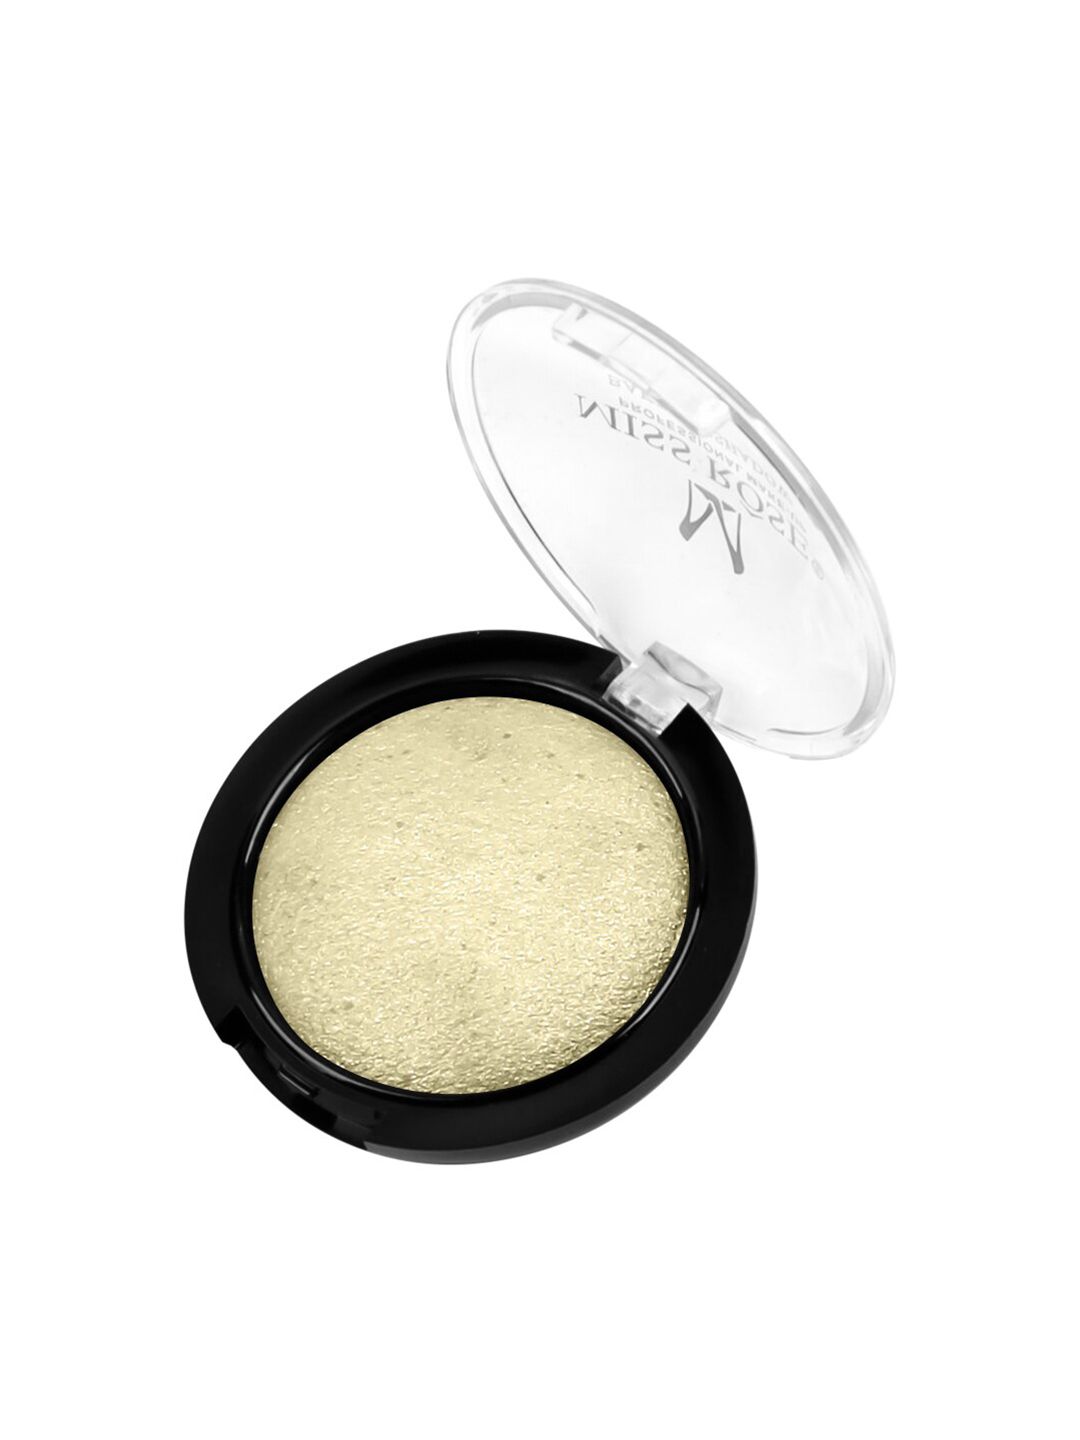 MISS ROSE Sea Green Monochrome Baked Eyeshadow 7001-073M 02 Price in India